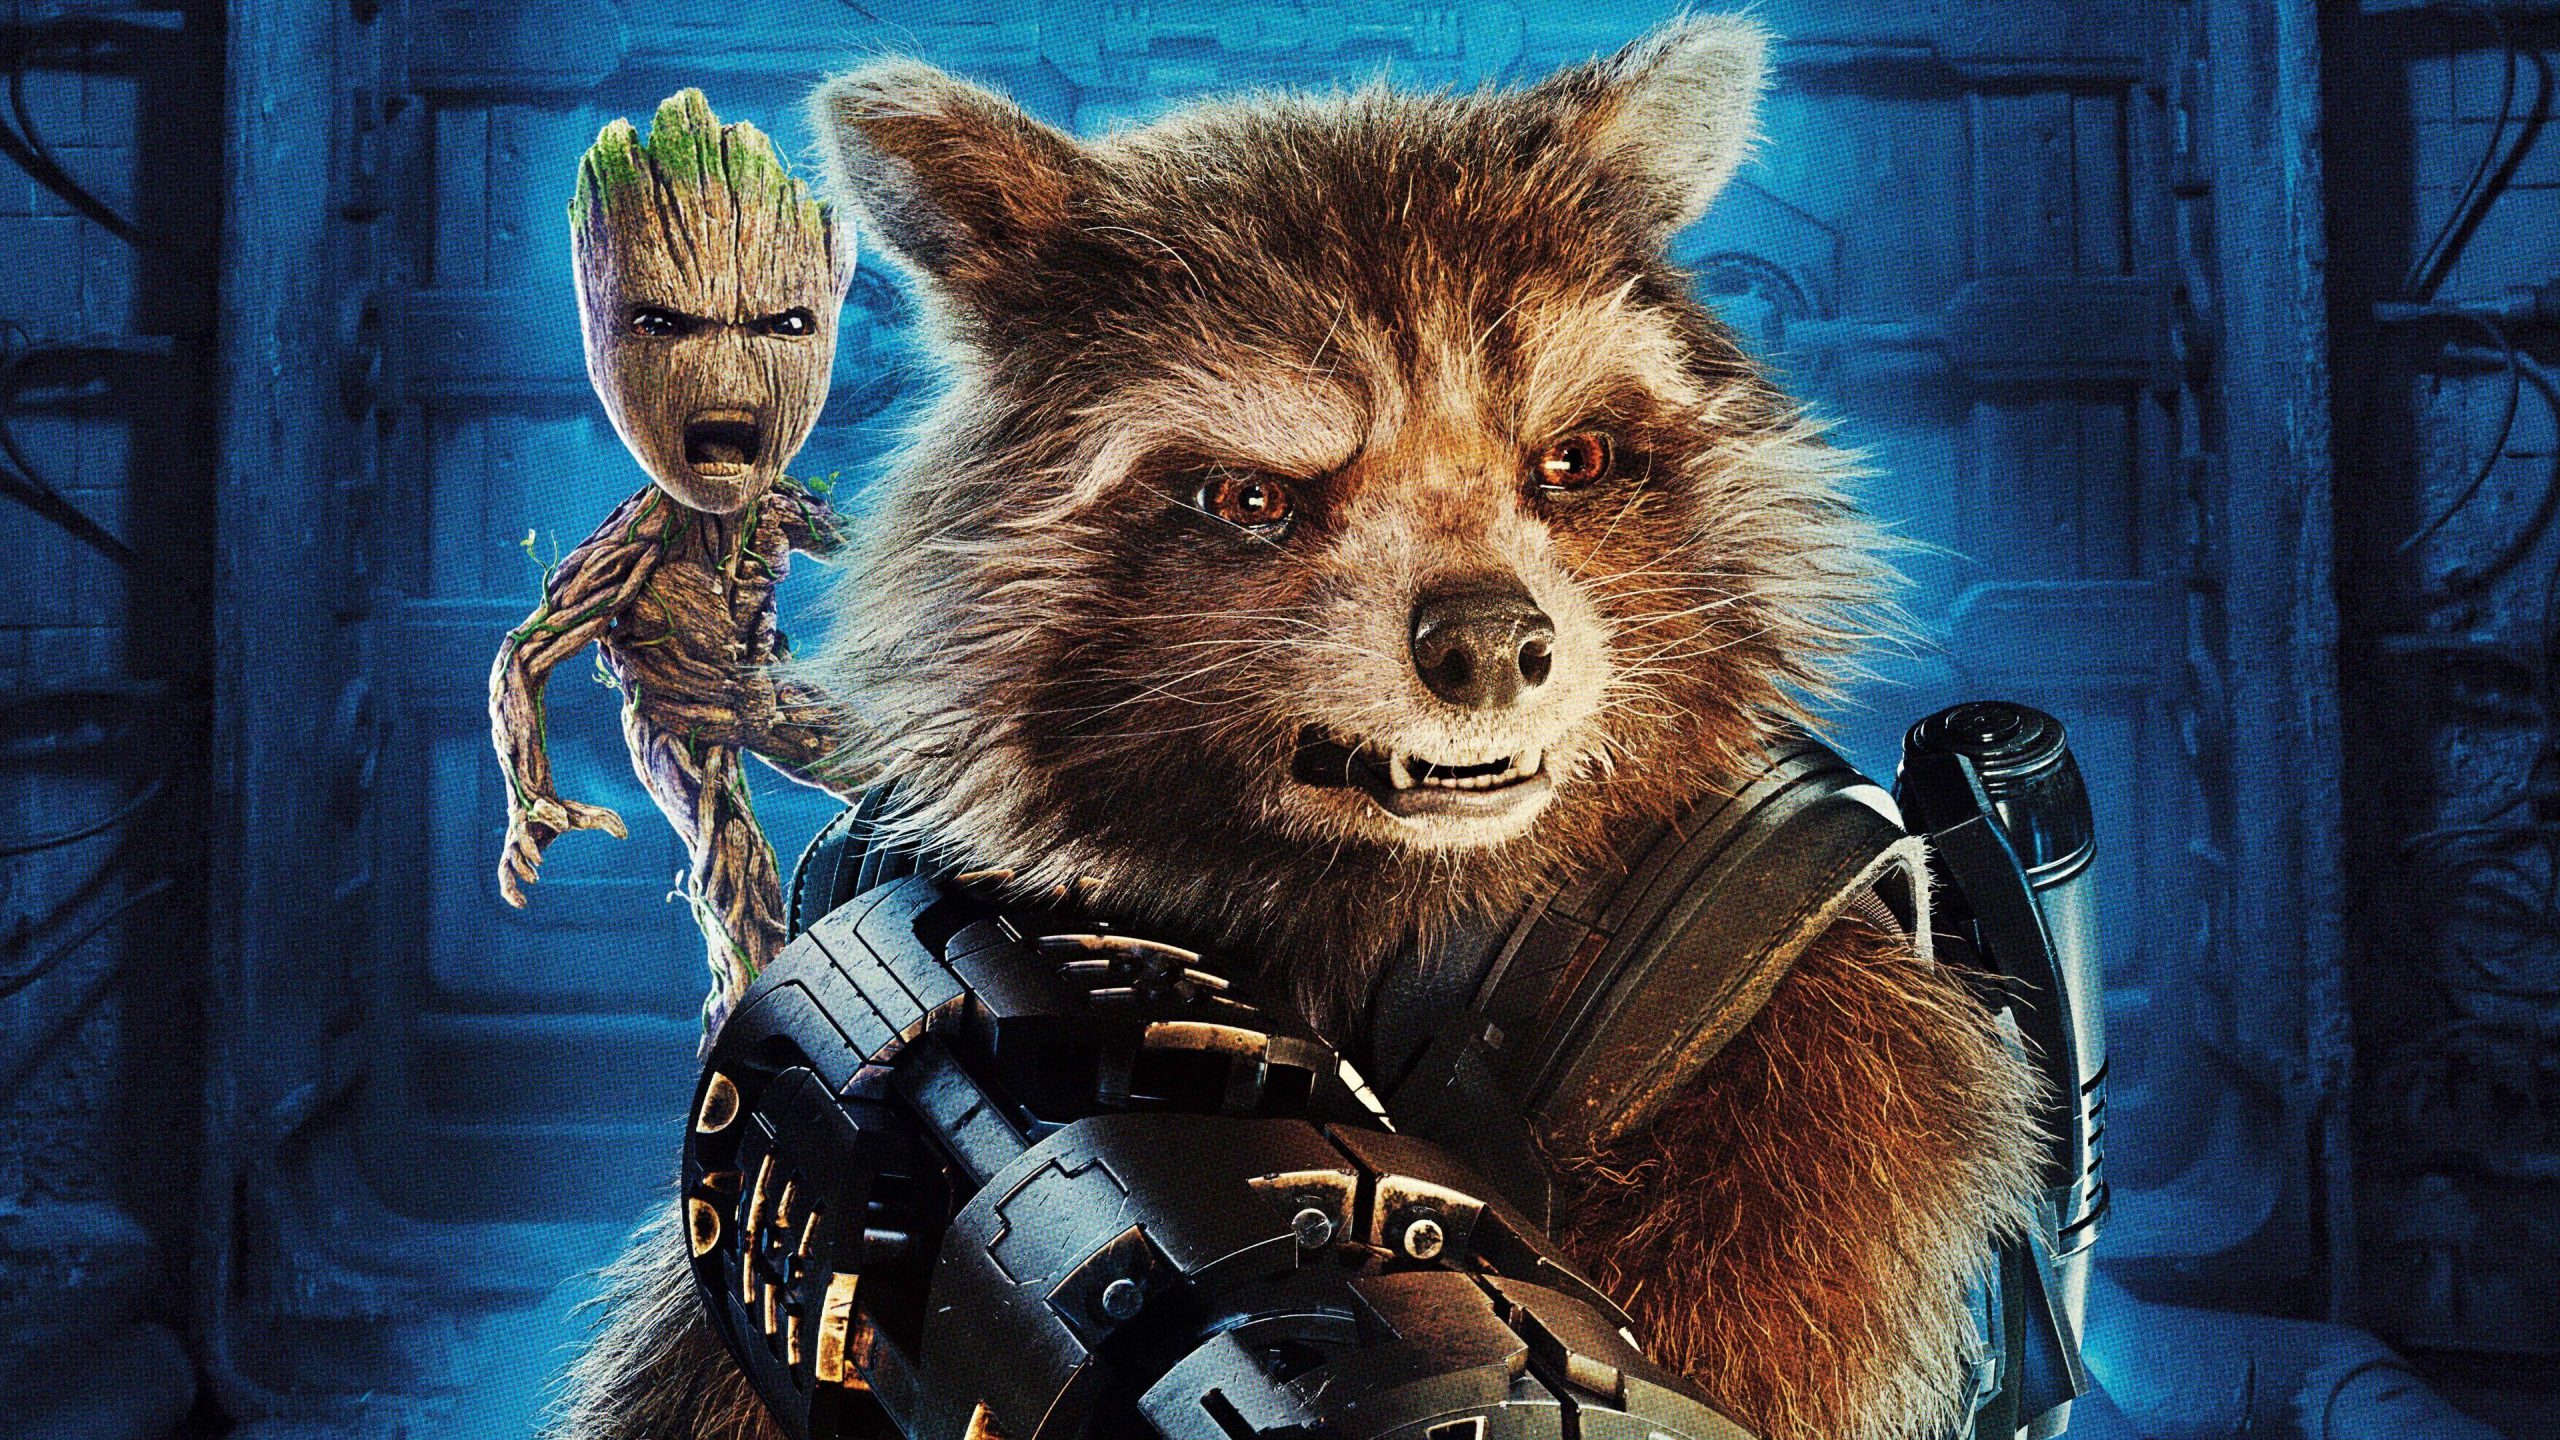 Cute Baby Groot Guardians Of The Galaxy Iphone Wallpaper